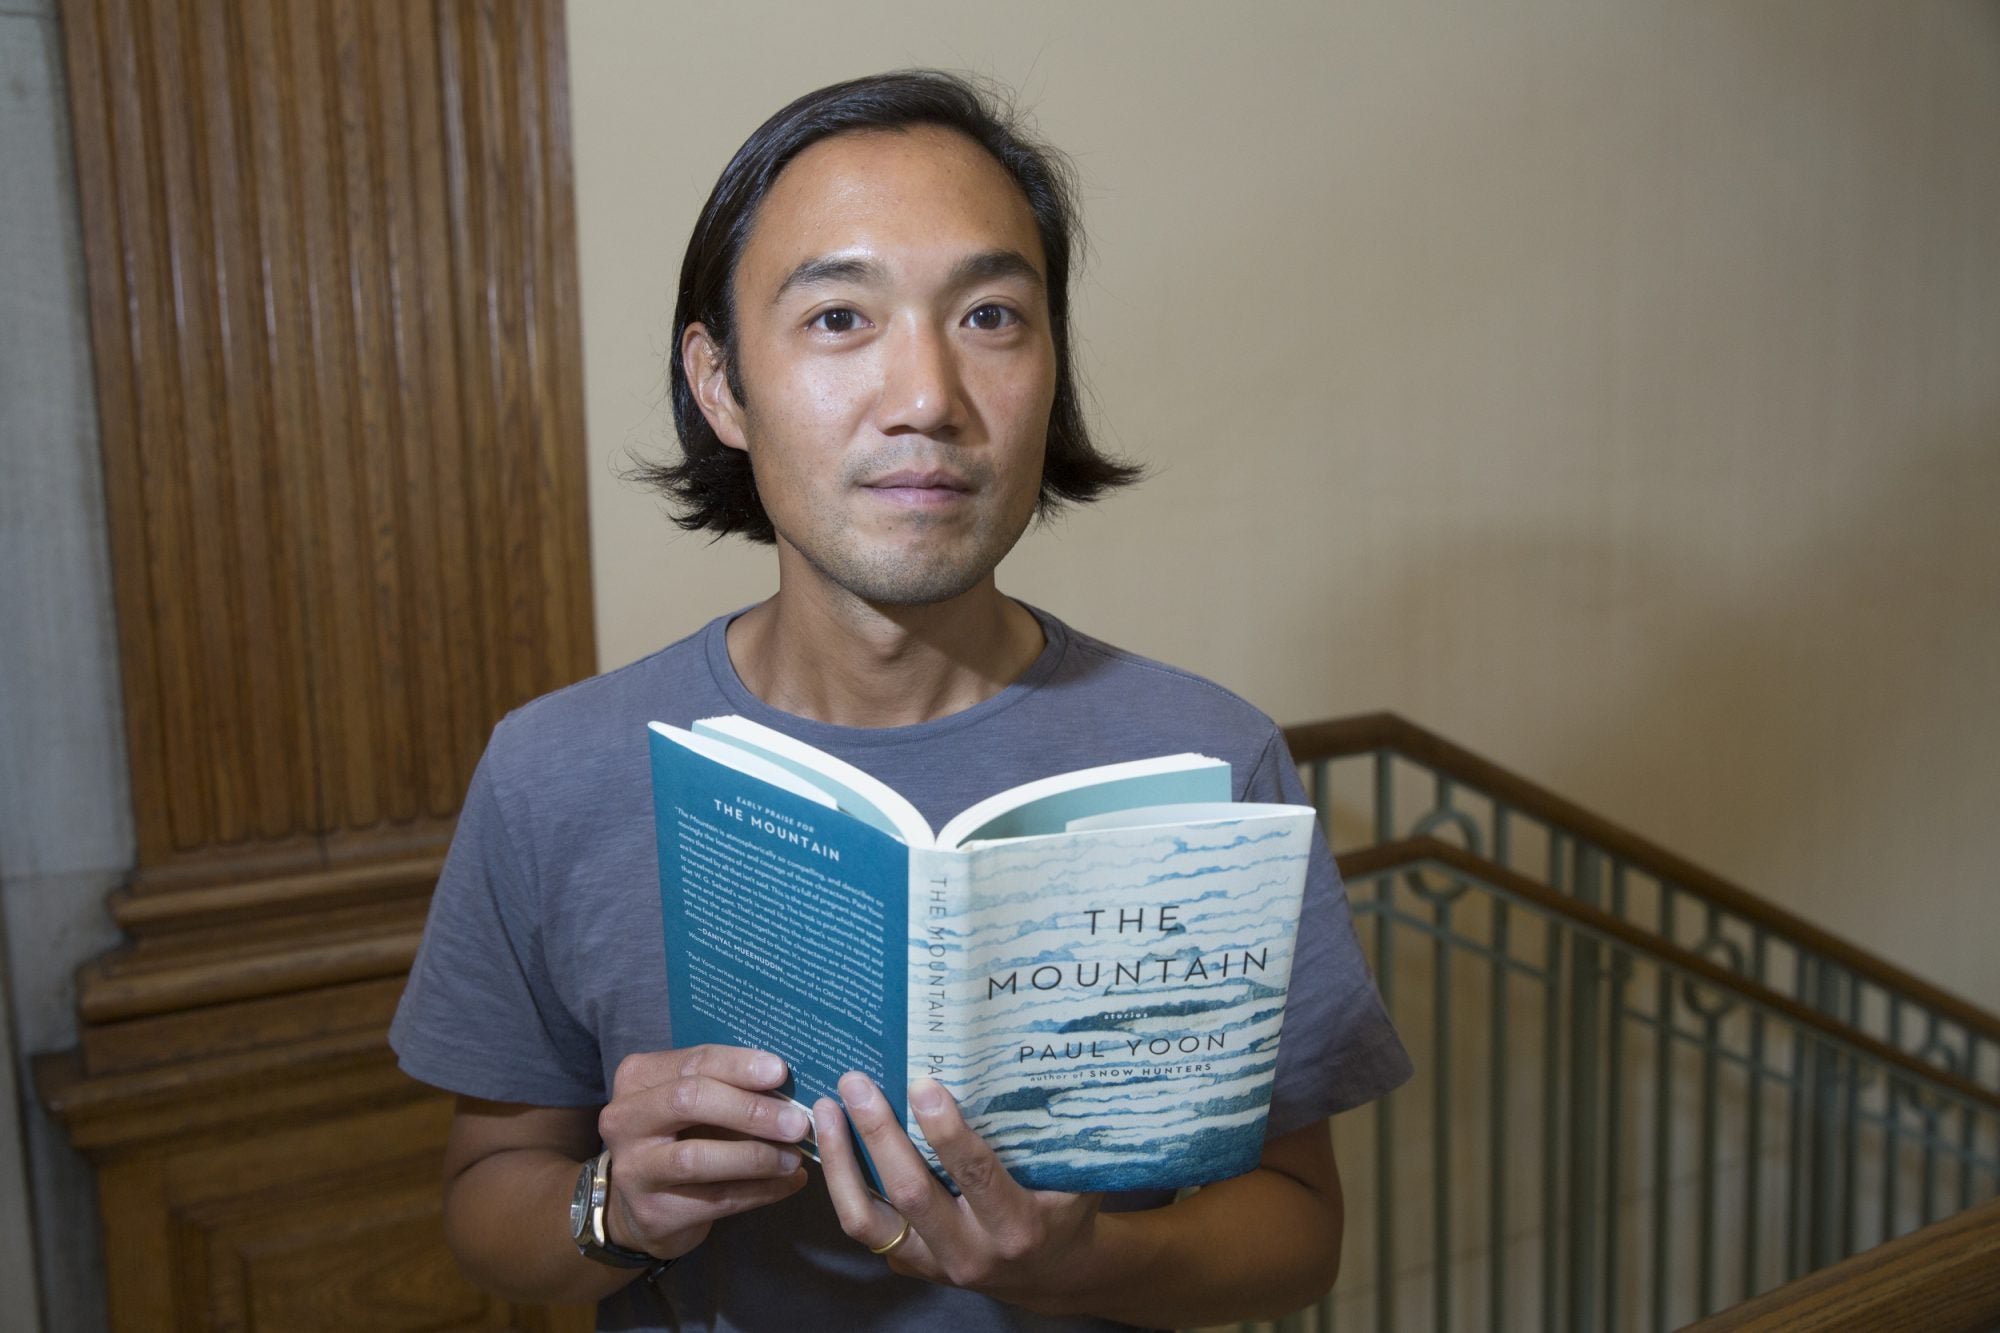 A man stands holding a book entitled "The Mountain"